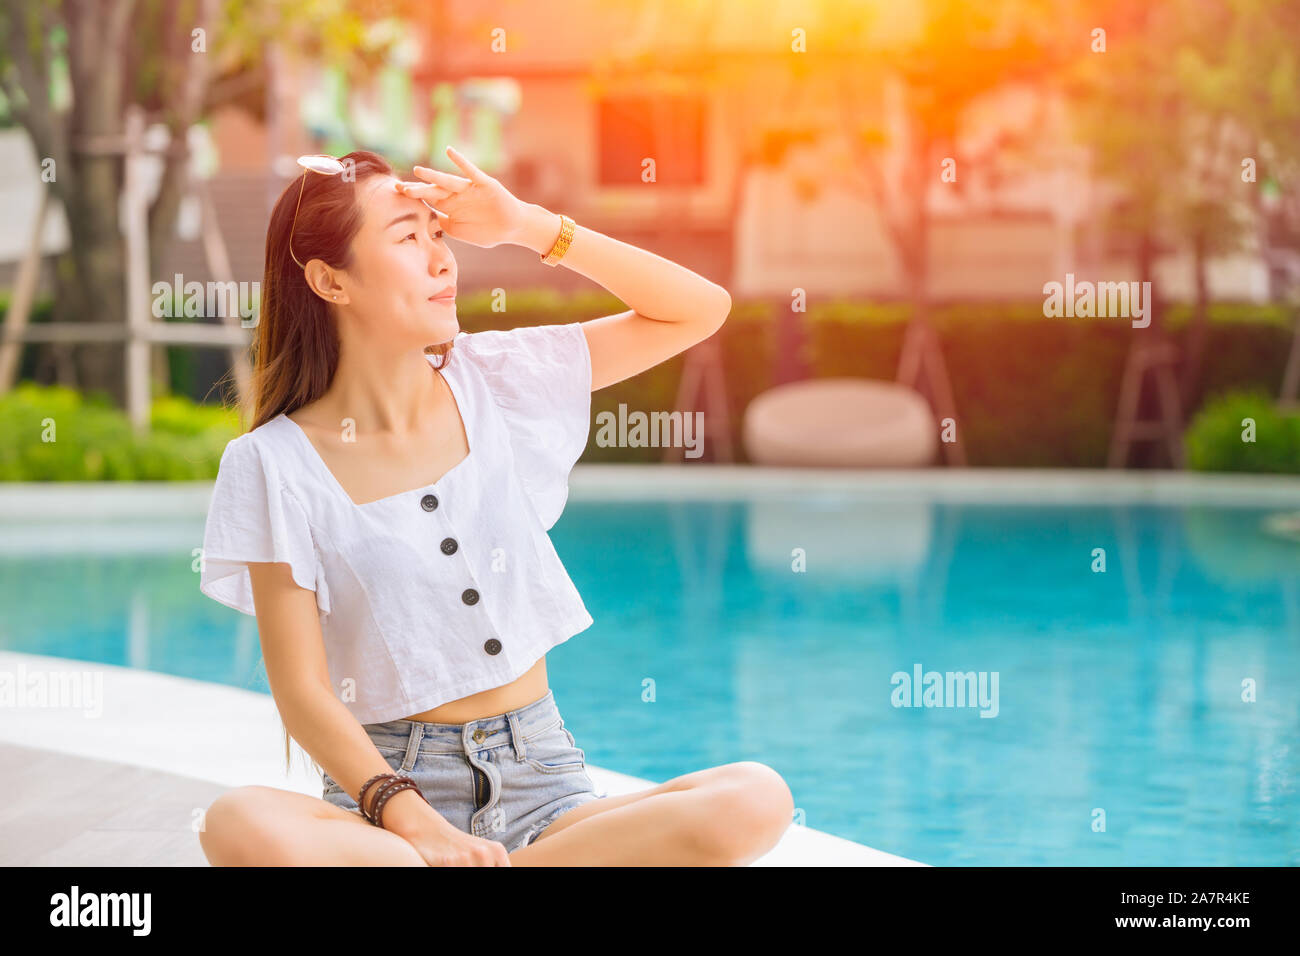 Beautiful woman with hot sunshine in summer sky for skin care and UV sun block Asian people beauty concept. Stock Photo